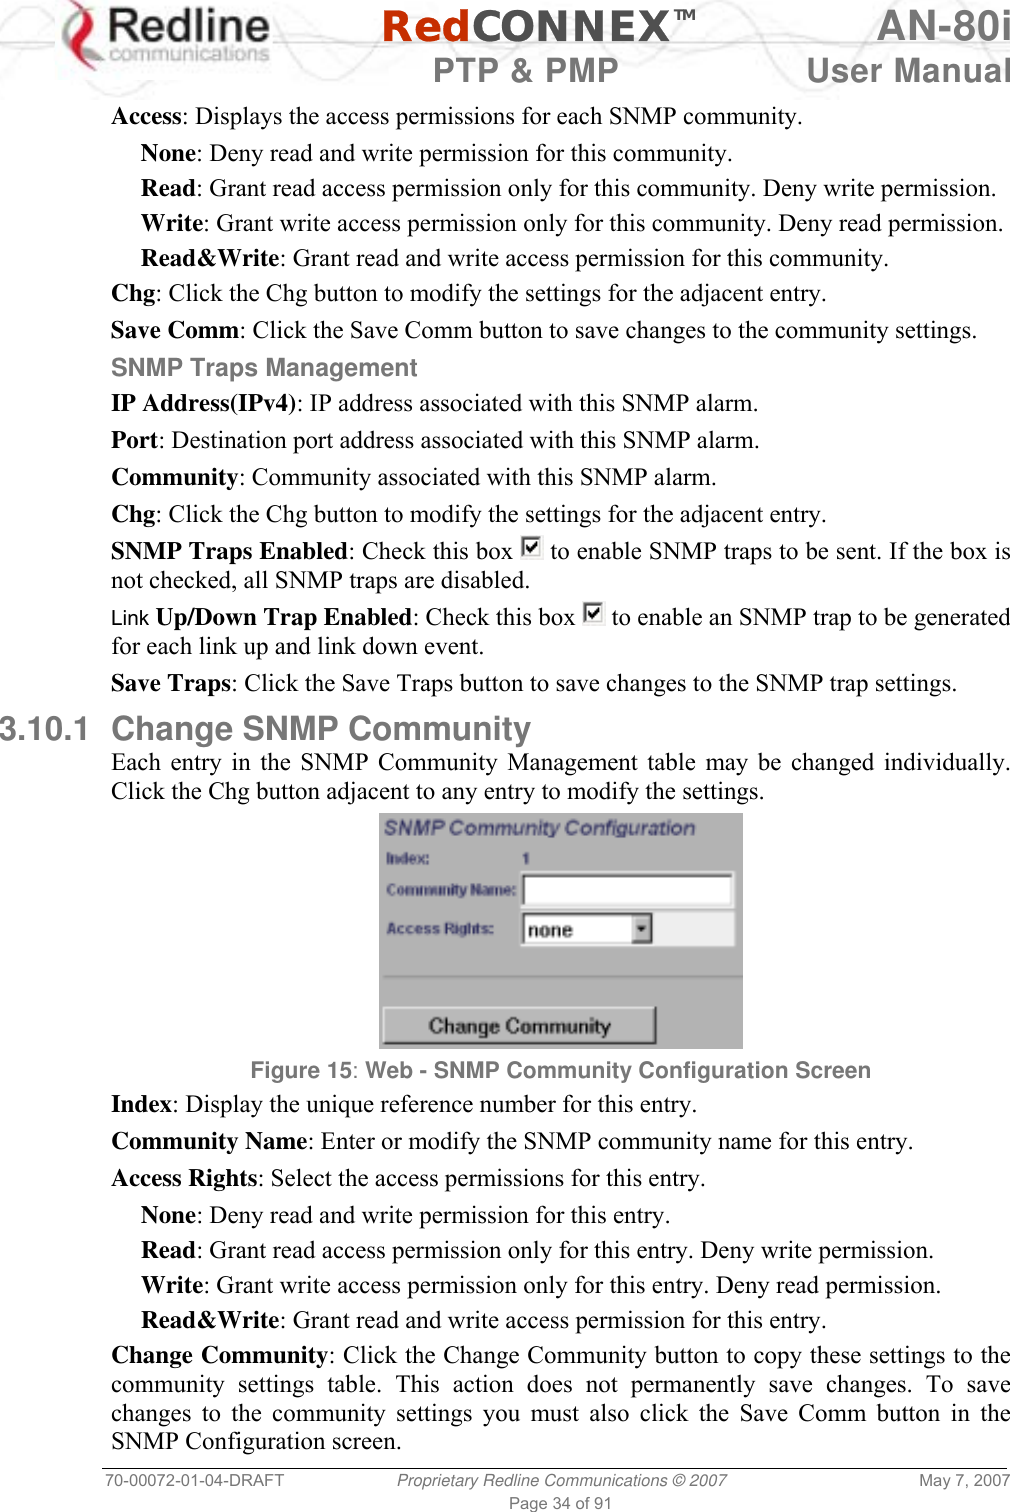   RedCONNEXTM AN-80i   PTP &amp; PMP  User Manual 70-00072-01-04-DRAFT  Proprietary Redline Communications © 2007  May 7, 2007 Page 34 of 91  Access: Displays the access permissions for each SNMP community. None: Deny read and write permission for this community. Read: Grant read access permission only for this community. Deny write permission. Write: Grant write access permission only for this community. Deny read permission. Read&amp;Write: Grant read and write access permission for this community. Chg: Click the Chg button to modify the settings for the adjacent entry. Save Comm: Click the Save Comm button to save changes to the community settings. SNMP Traps Management IP Address(IPv4): IP address associated with this SNMP alarm. Port: Destination port address associated with this SNMP alarm. Community: Community associated with this SNMP alarm. Chg: Click the Chg button to modify the settings for the adjacent entry. SNMP Traps Enabled: Check this box   to enable SNMP traps to be sent. If the box is not checked, all SNMP traps are disabled. Link Up/Down Trap Enabled: Check this box   to enable an SNMP trap to be generated for each link up and link down event. Save Traps: Click the Save Traps button to save changes to the SNMP trap settings. 3.10.1  Change SNMP Community Each entry in the SNMP Community Management table may be changed individually. Click the Chg button adjacent to any entry to modify the settings.  Figure 15: Web - SNMP Community Configuration Screen  Index: Display the unique reference number for this entry. Community Name: Enter or modify the SNMP community name for this entry. Access Rights: Select the access permissions for this entry. None: Deny read and write permission for this entry. Read: Grant read access permission only for this entry. Deny write permission. Write: Grant write access permission only for this entry. Deny read permission. Read&amp;Write: Grant read and write access permission for this entry. Change Community: Click the Change Community button to copy these settings to the community settings table. This action does not permanently save changes. To save changes to the community settings you must also click the Save Comm button in the SNMP Configuration screen. 